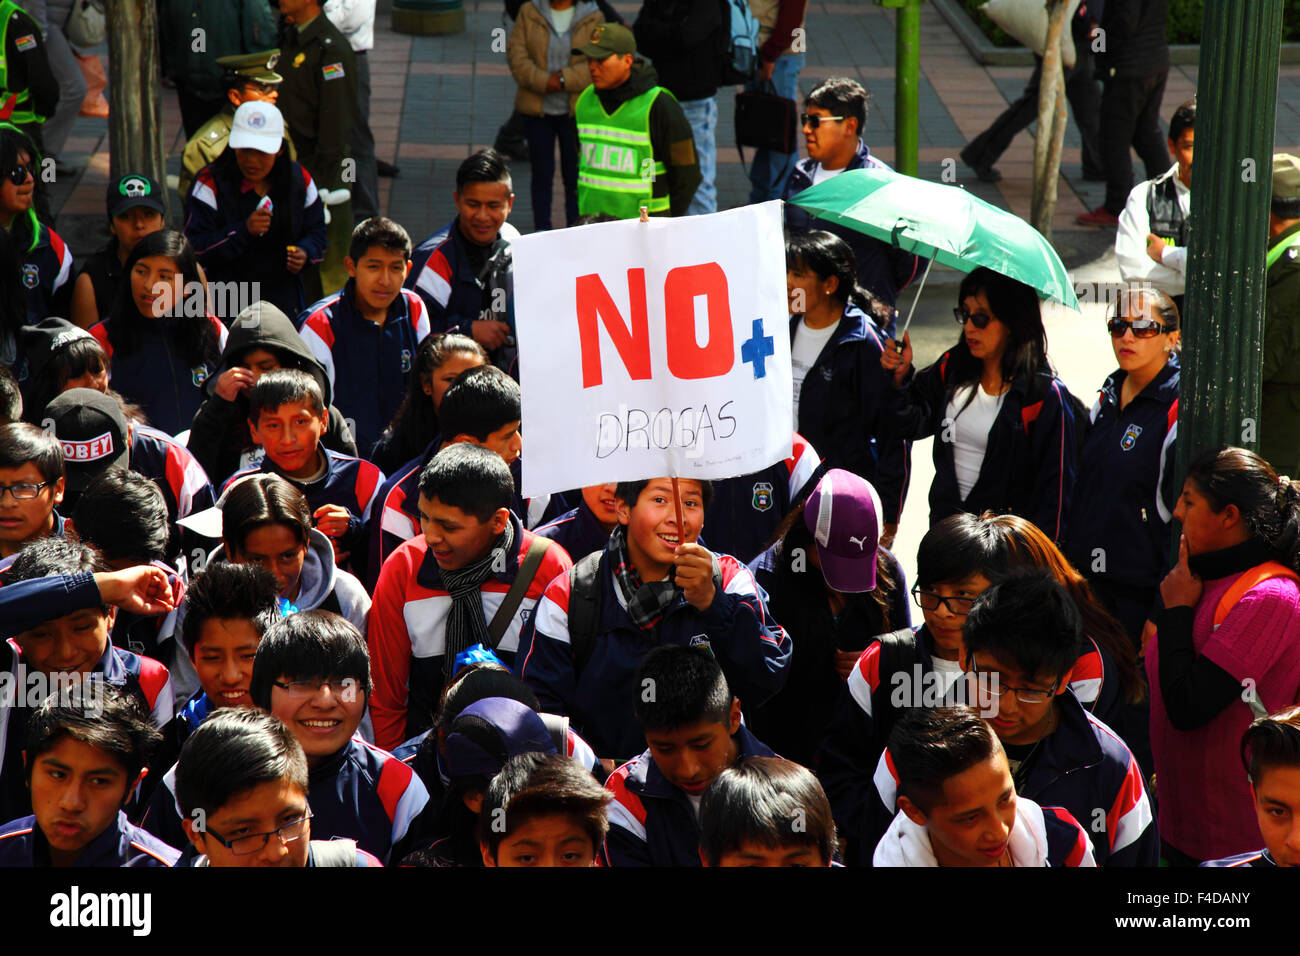 La Paz, Bolivia, 16th October 2015. A male student carries a placard saying 'No more drugs' during a march through La Paz city centre warning of the dangers of drug use. The demonstration is organised every year by the police together with schools and colleges to educate and raise awareness about drugs and their dangers. Credit: James Brunker / Alamy Live News Stock Photo